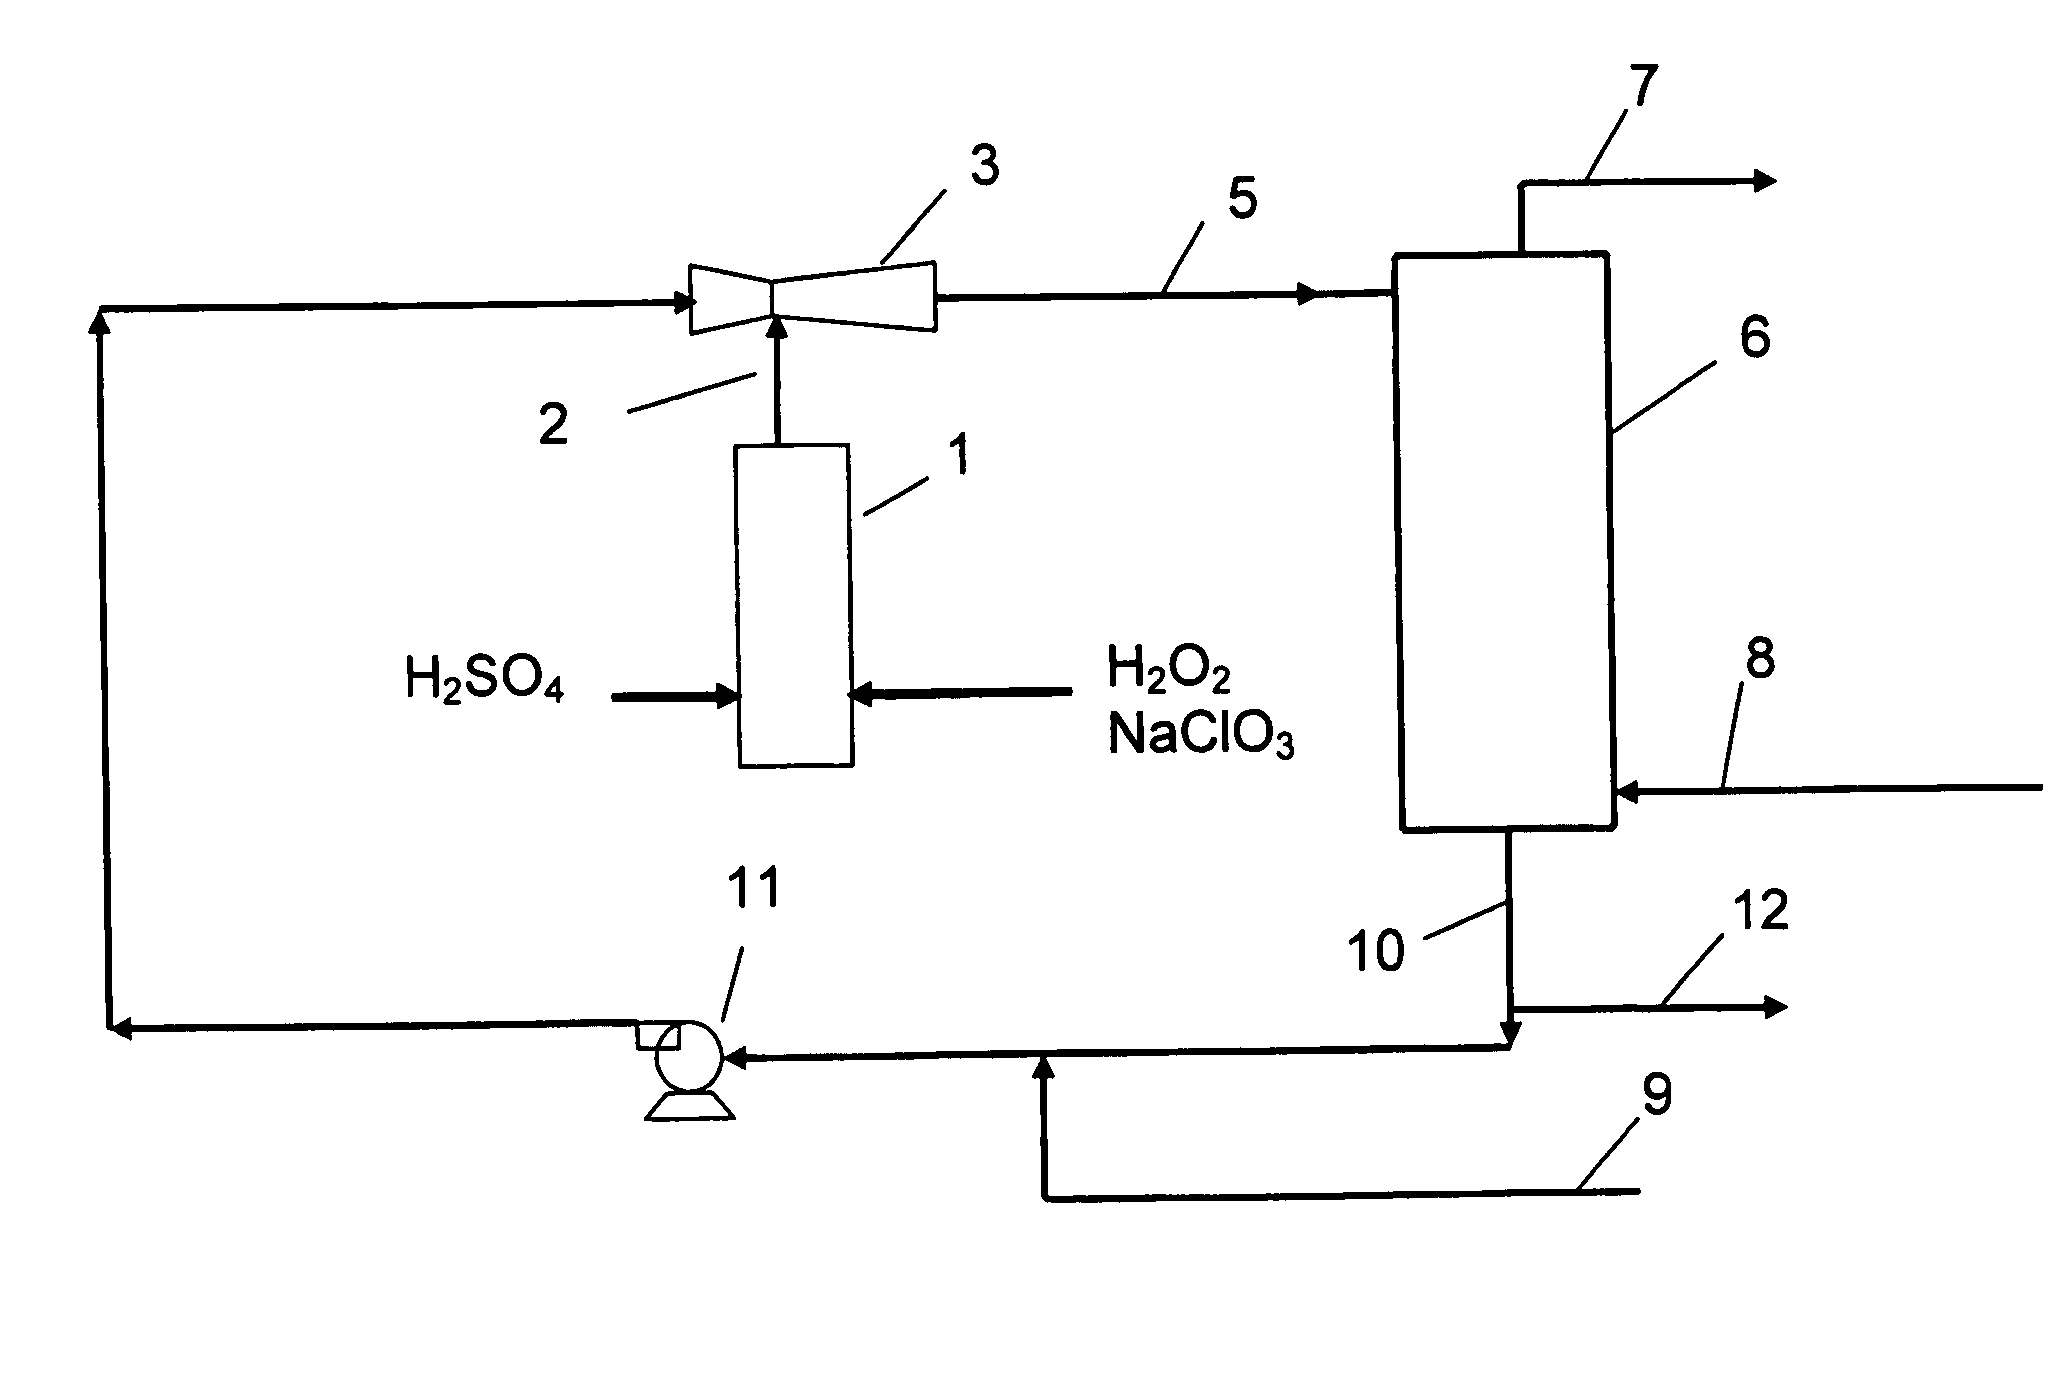 Process for production of chlorine dioxide